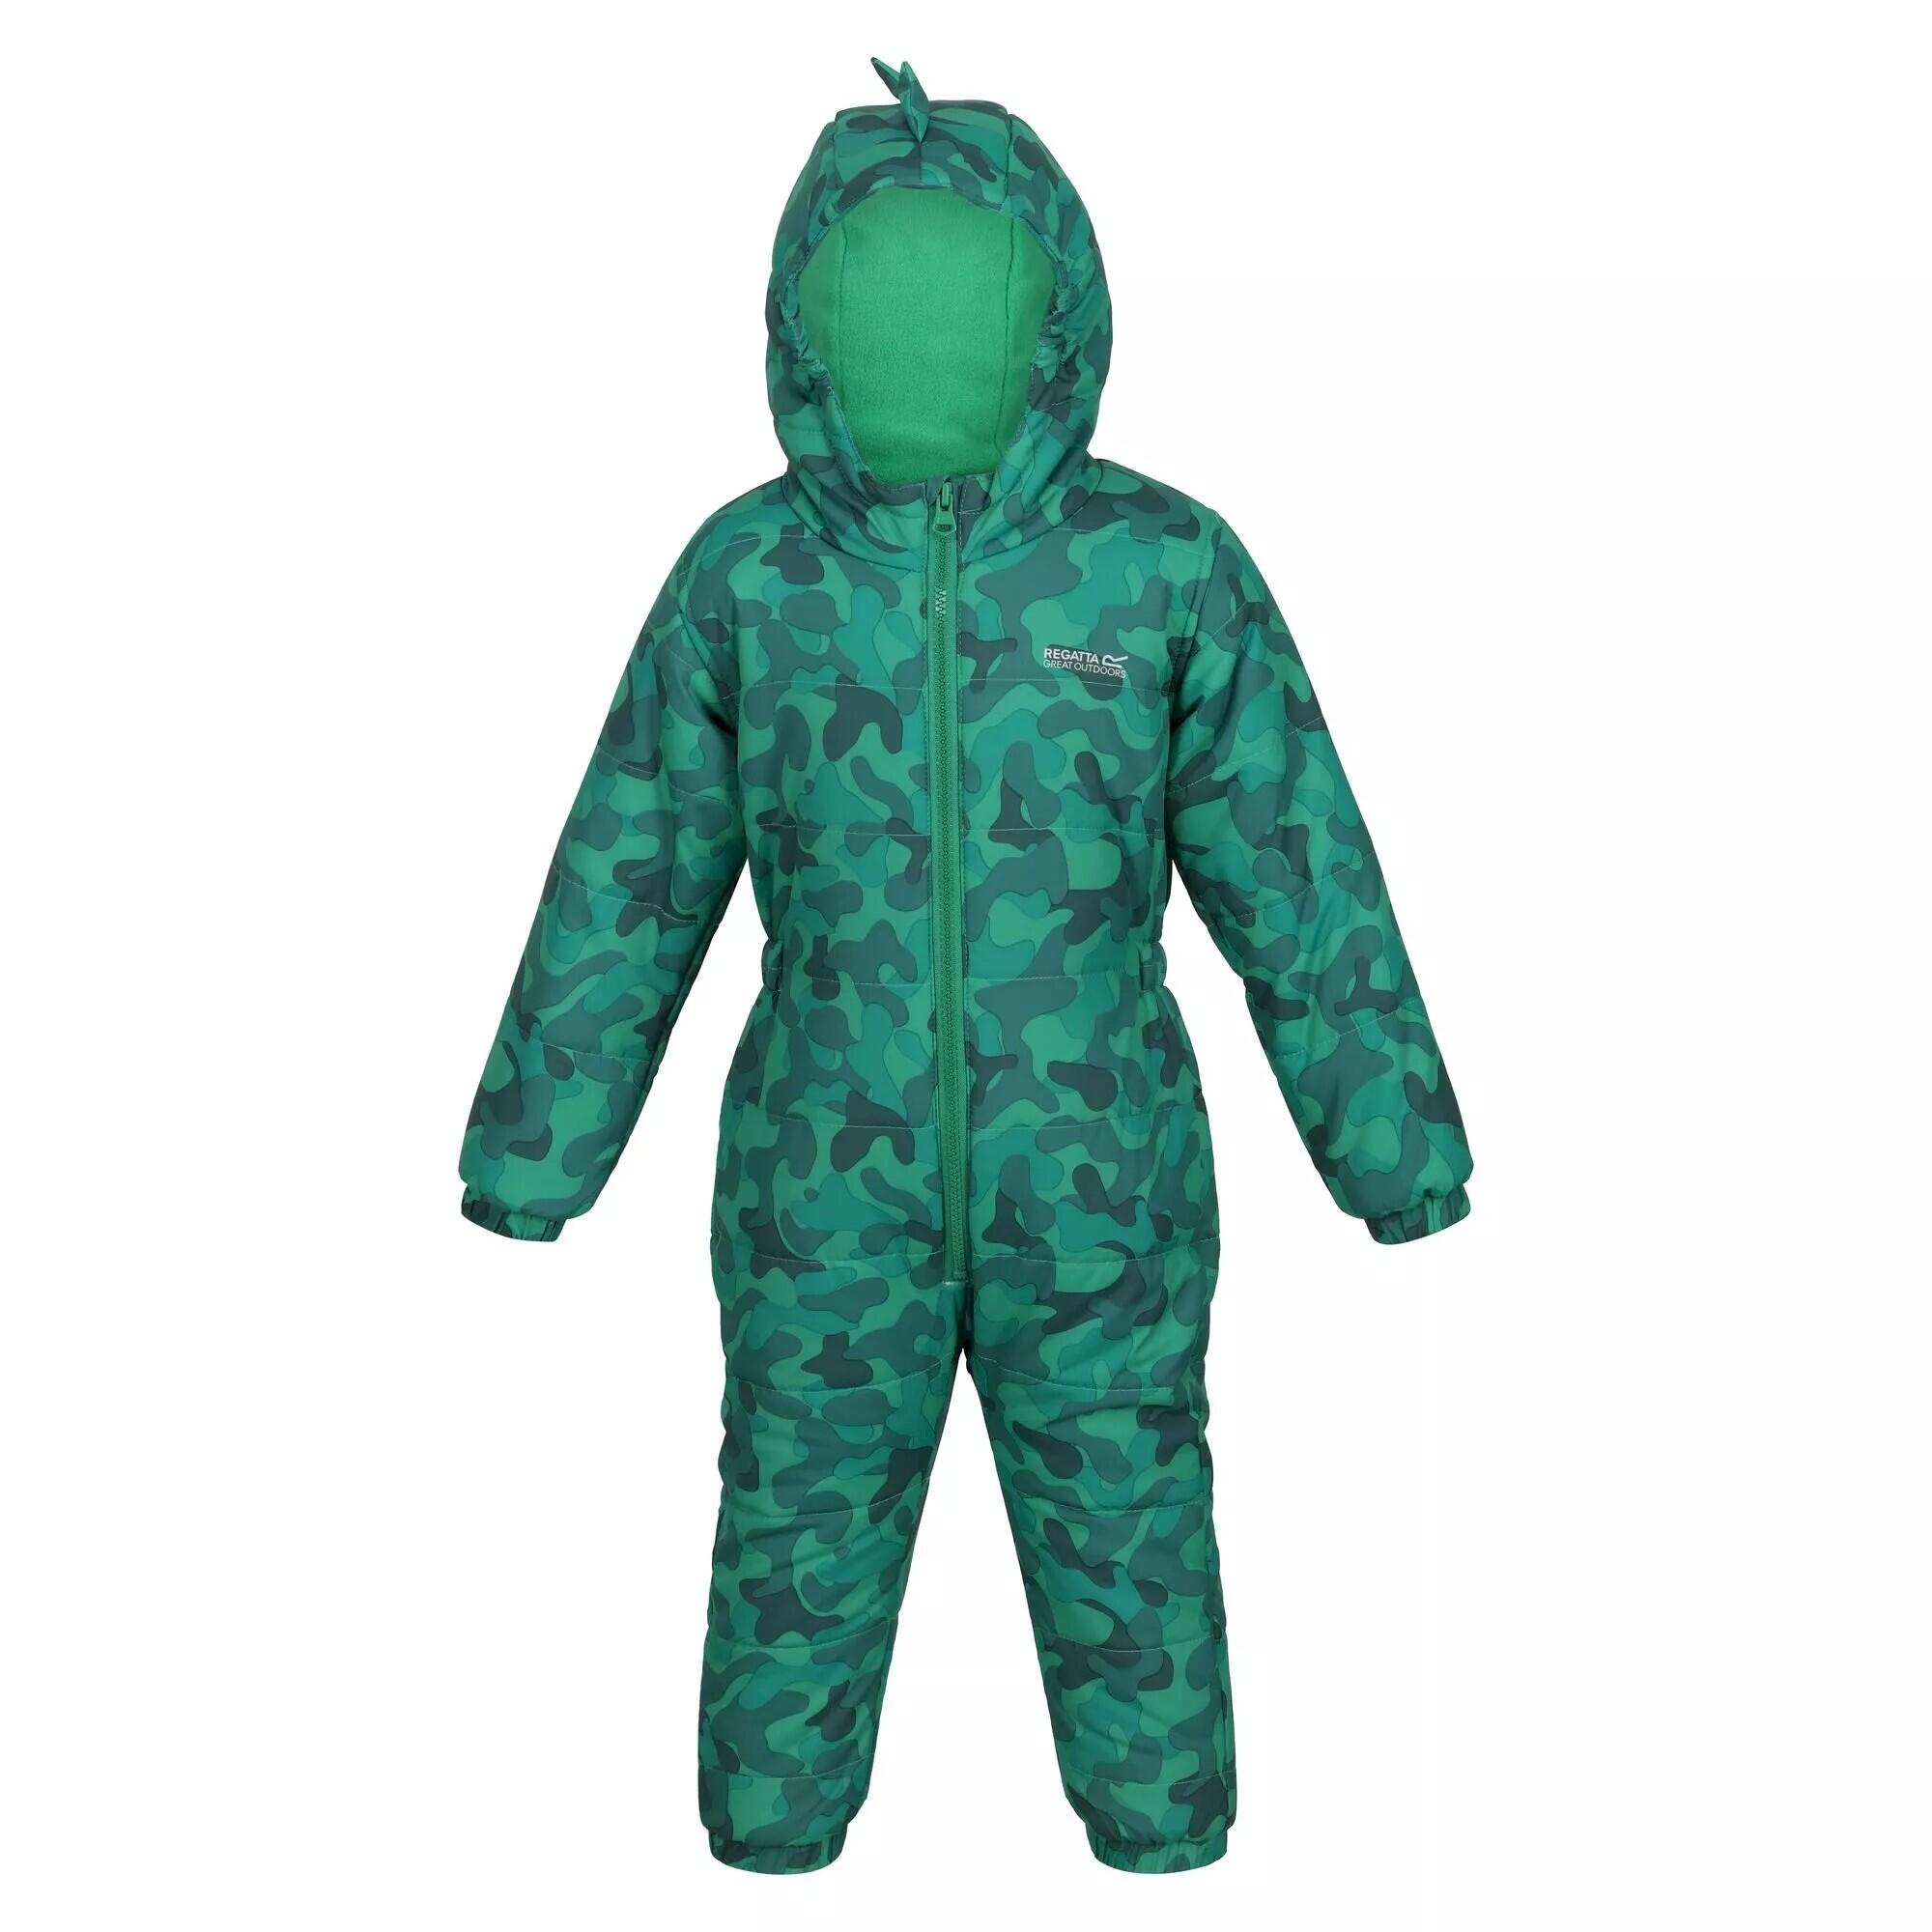 Childrens/Kids Penrose Camo Puddle Suit (Jellybean Green) 1/5